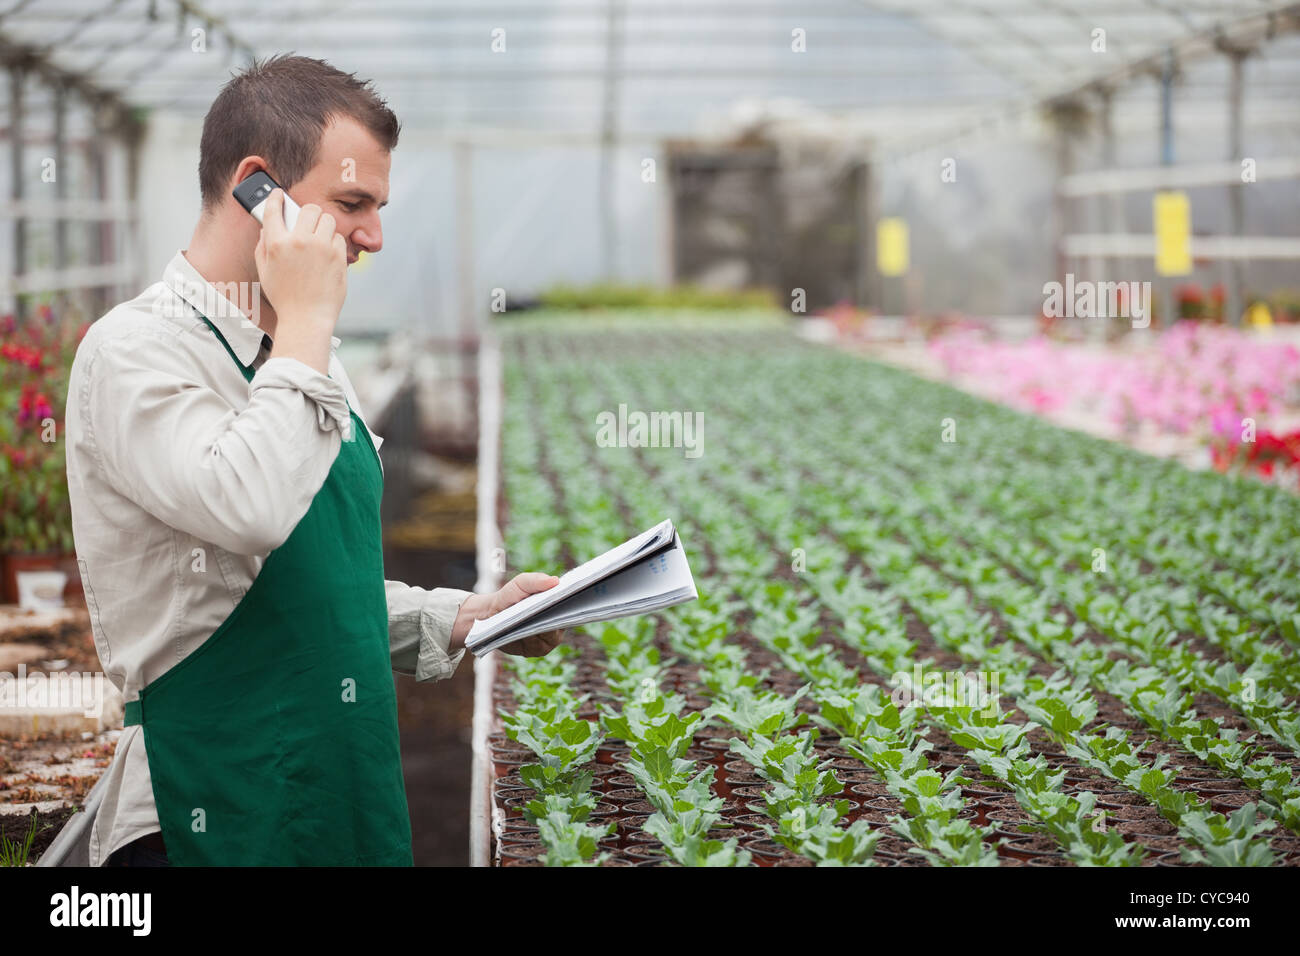 Gardener calling and taking notes in greenhouse Stock Photo